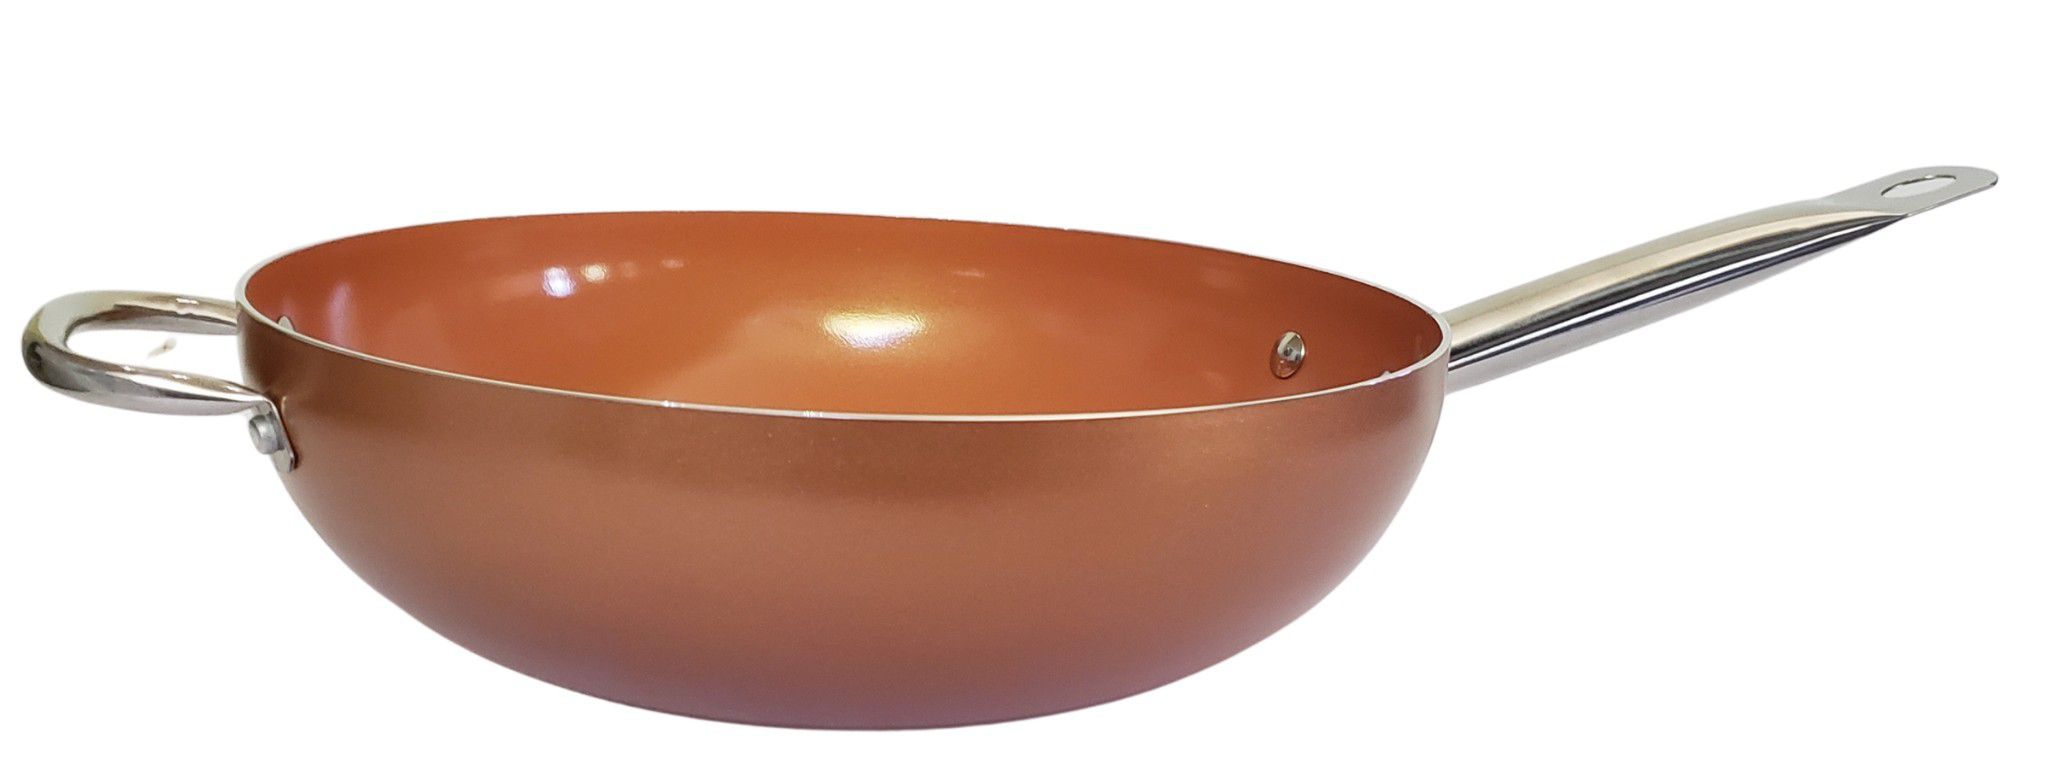 Nonstick Ceramic Copper 12 Inch Wok and Stir Fry Pans with Lid